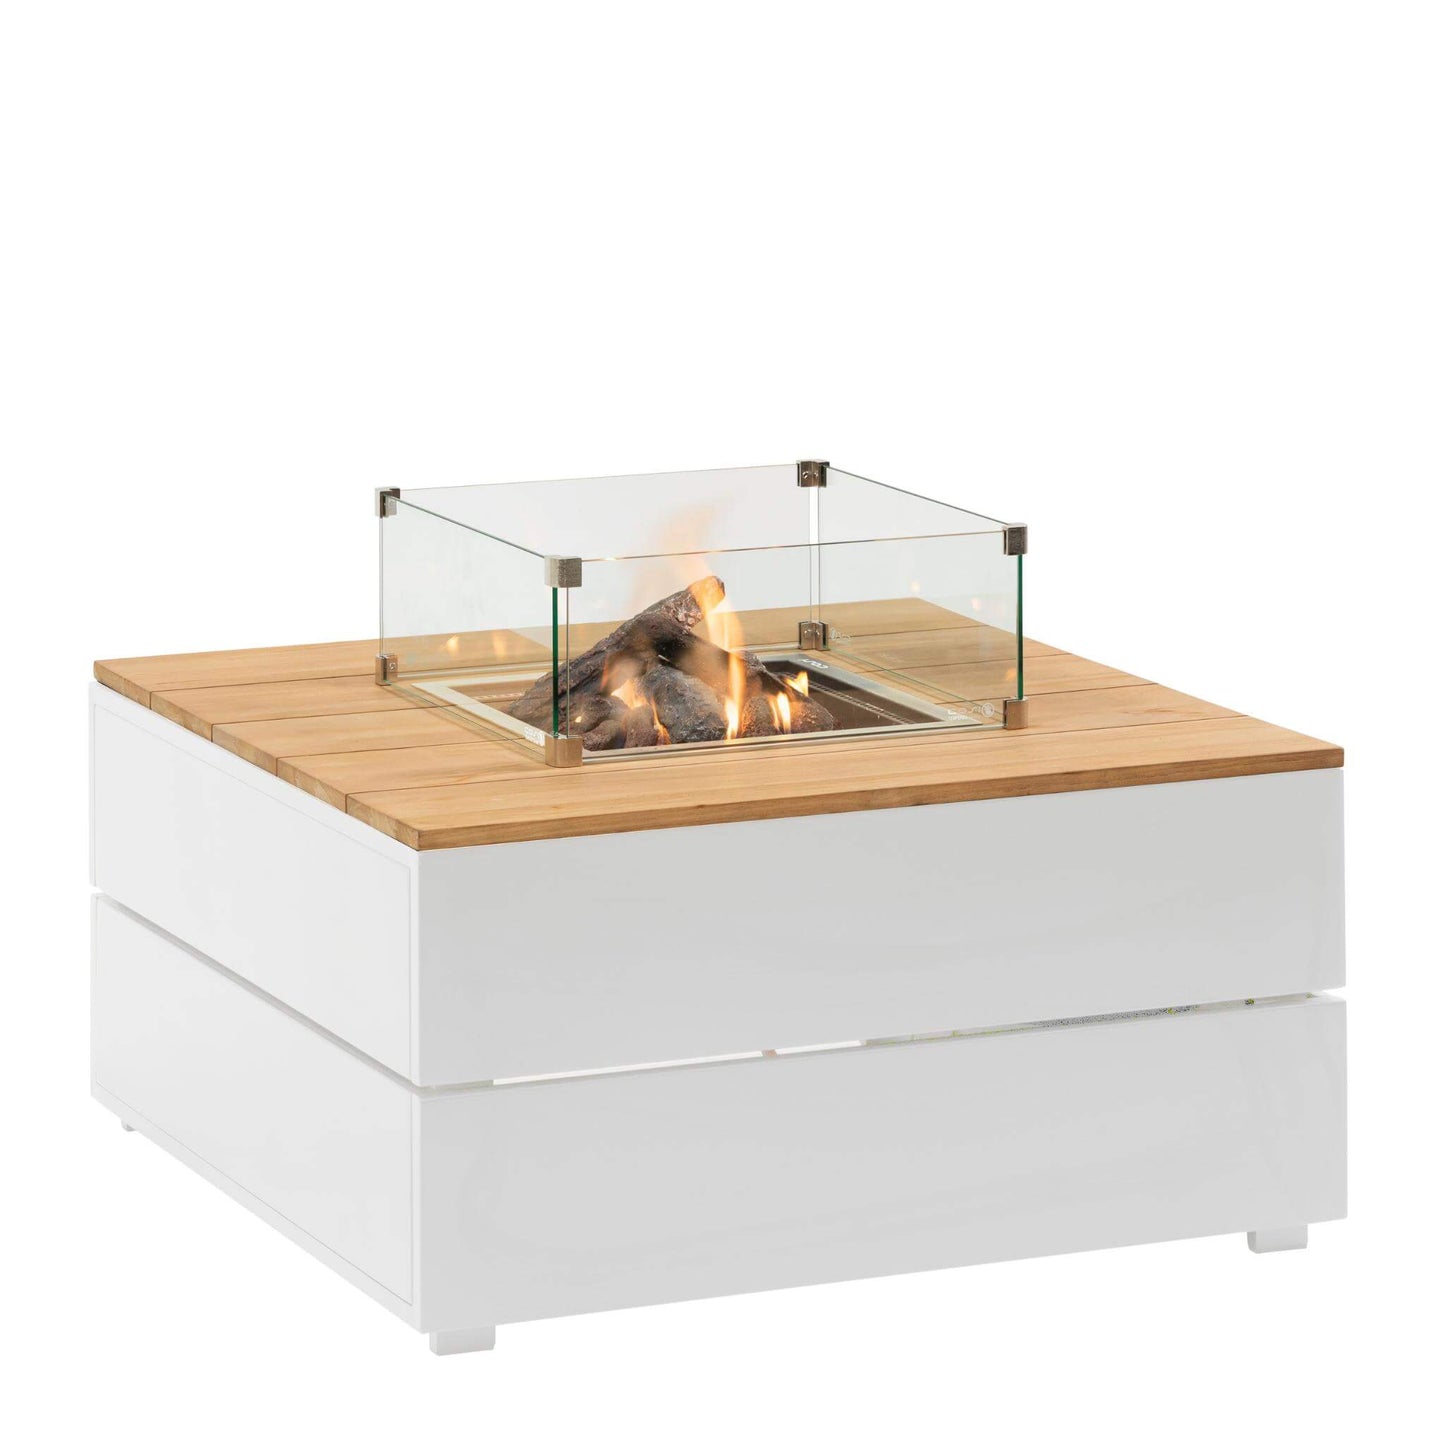 Cosipure 100 Square Teak Tabletop Outdoor Gas Fire Pit Table